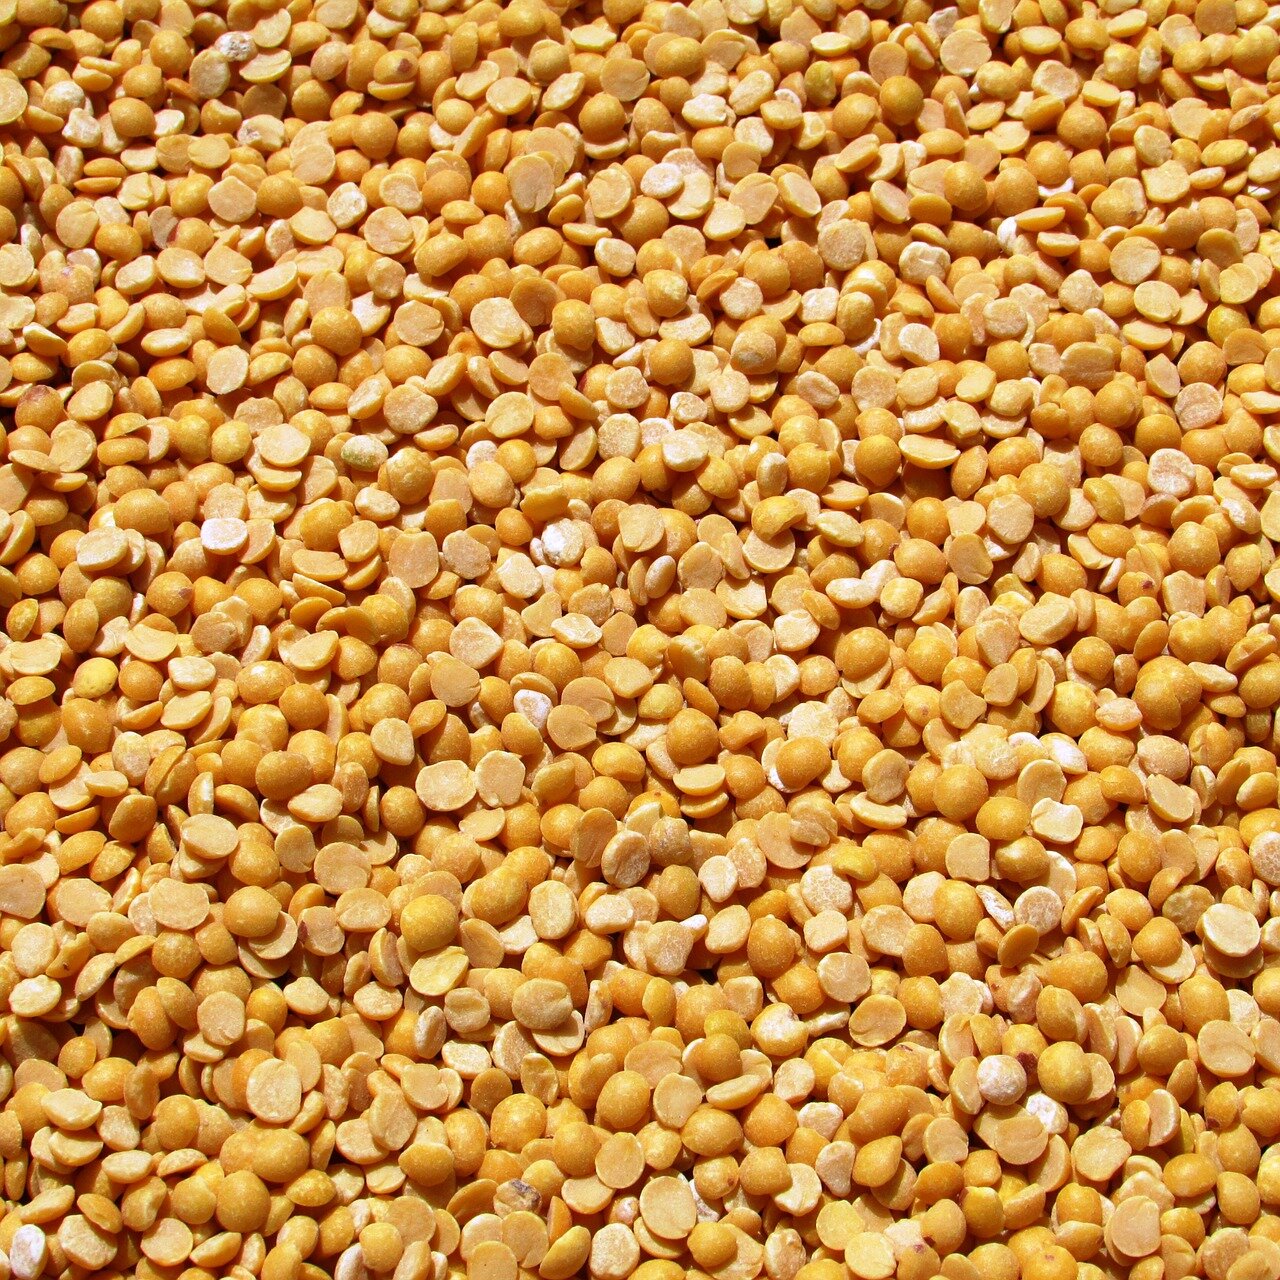 Yellow peas are the source of pea protein powder.